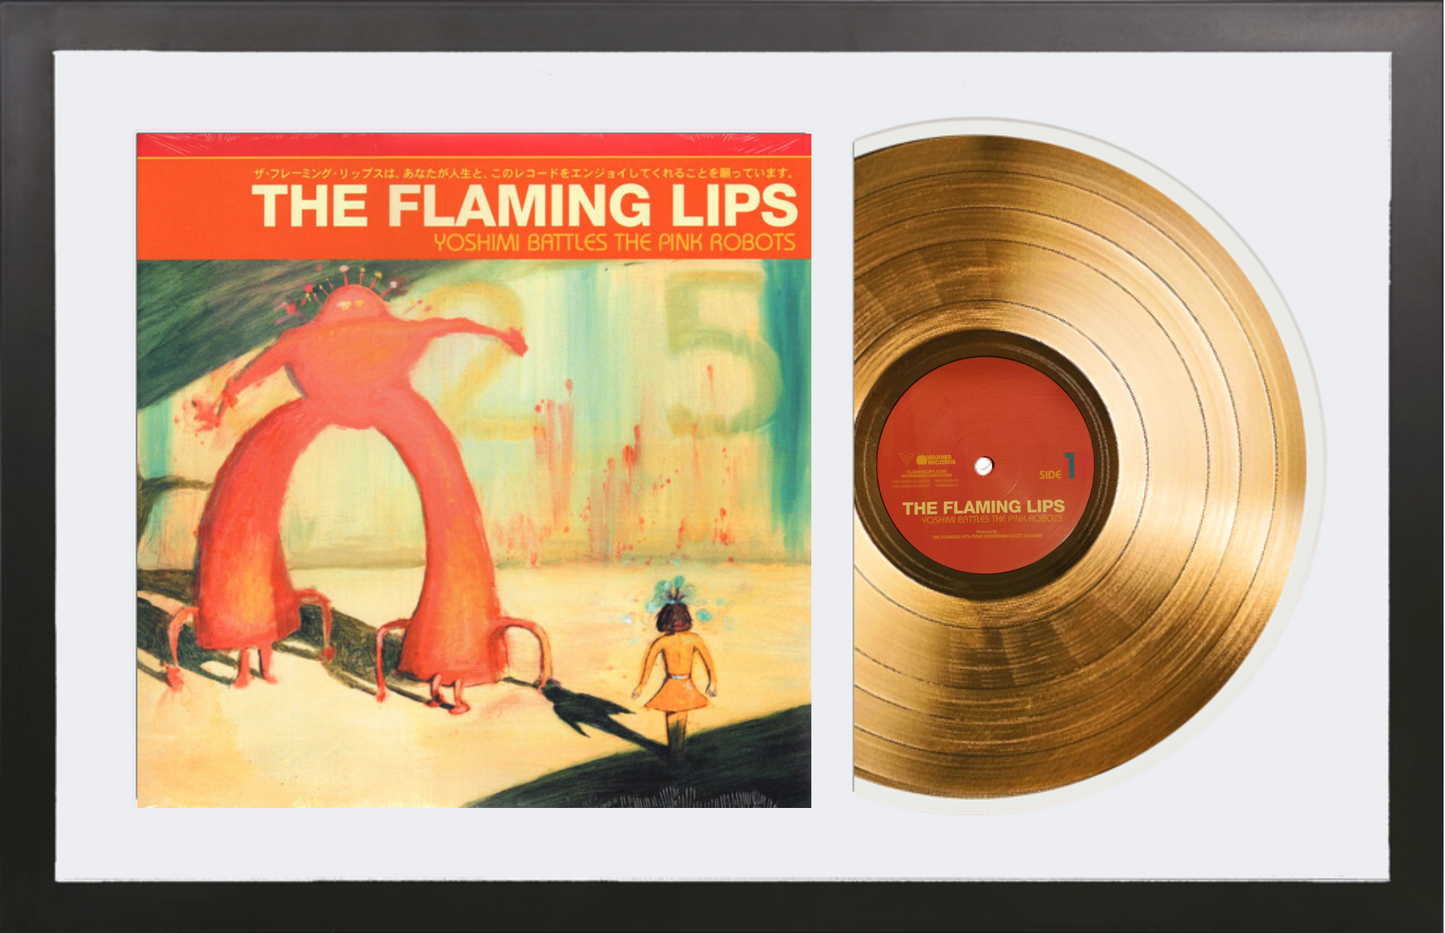 The Flaming Lips - Yoshimi Battles the Pink Robots - 14K Gold Framed Album - Limited Edition Vinyl